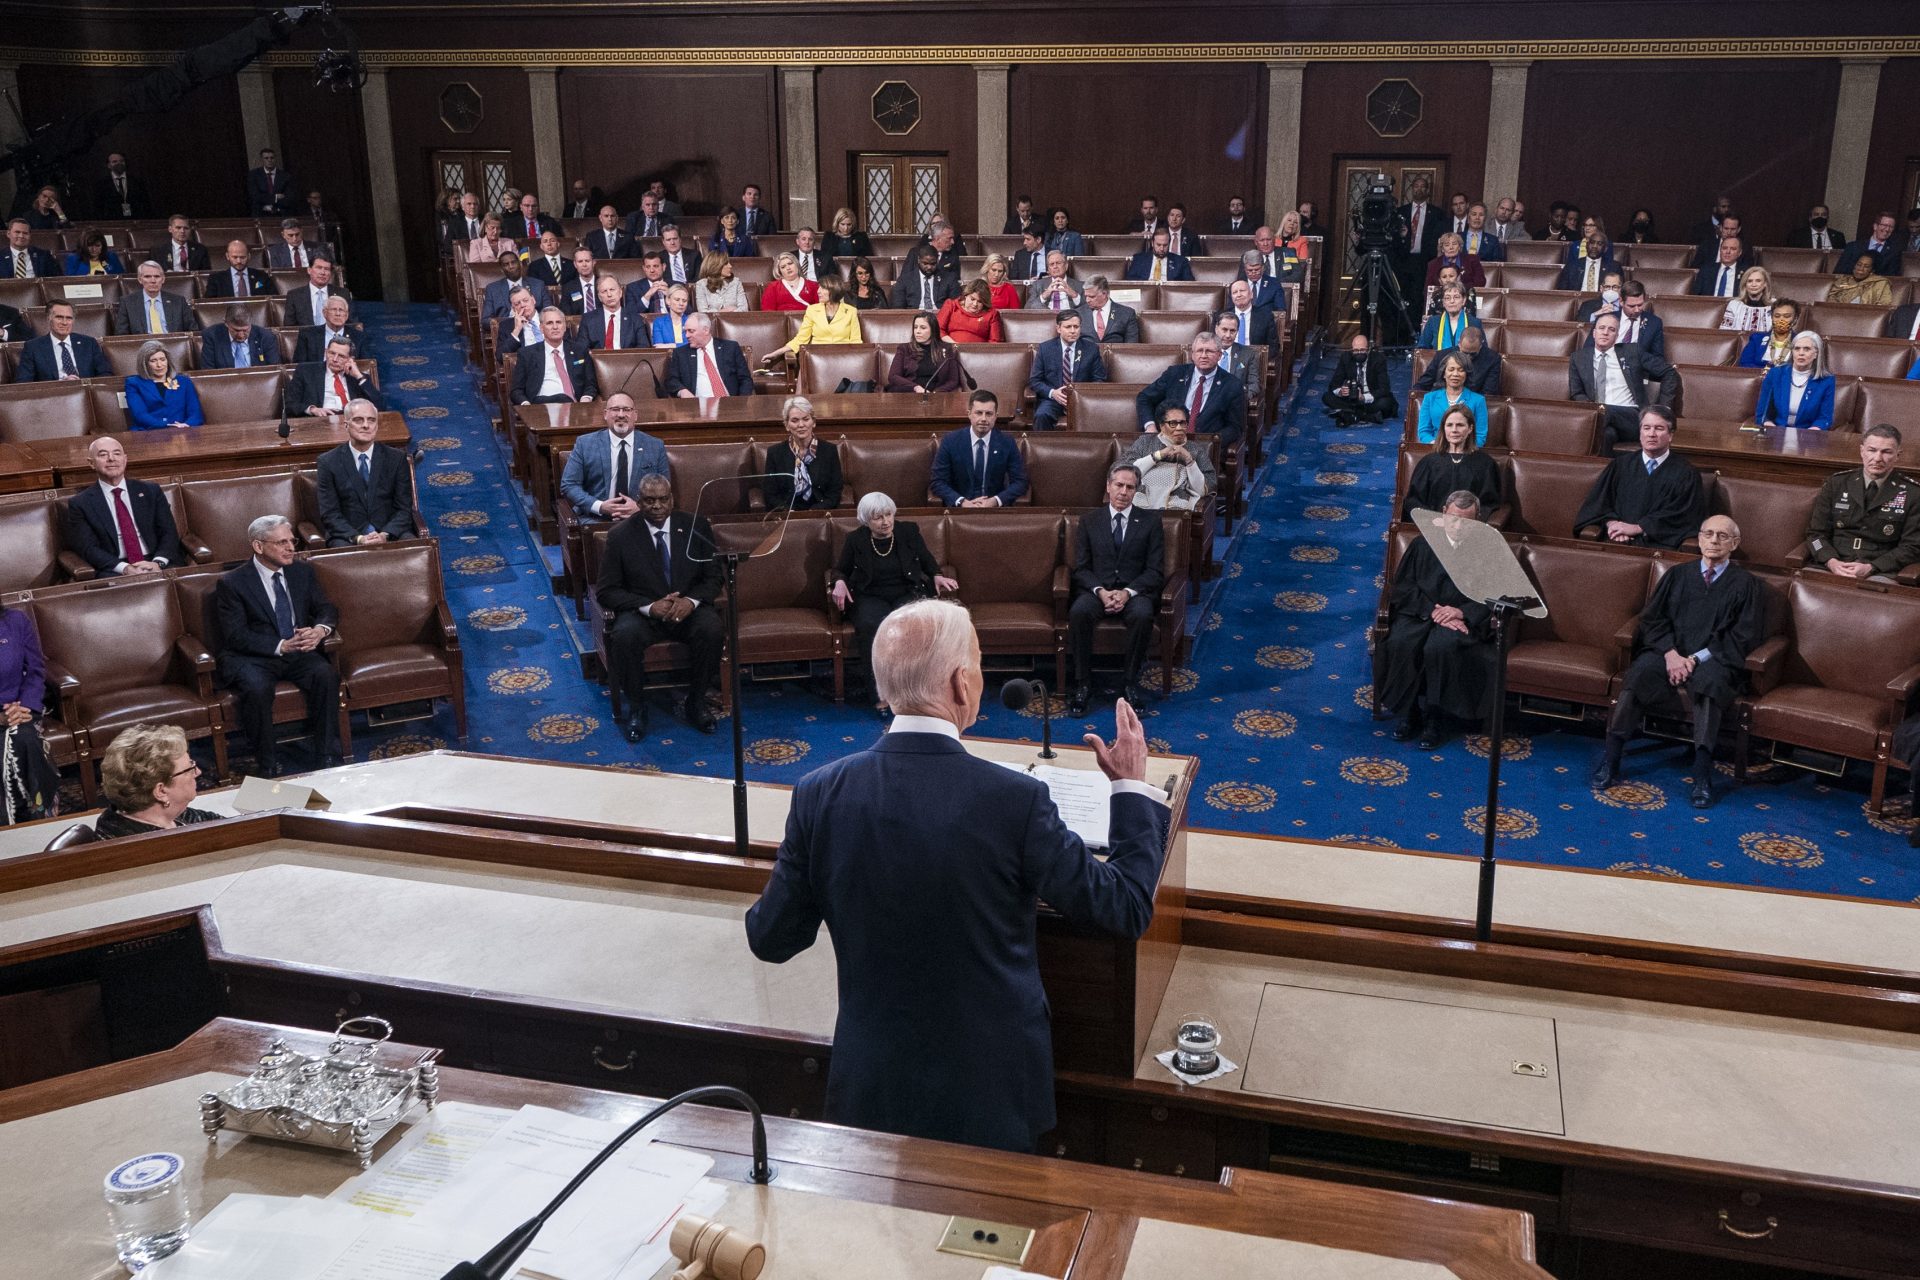 President Joe Biden delivers his first State of the Union address to a joint session of Congress at the Capitol, Tuesday, March 1, 2022, in Washington.